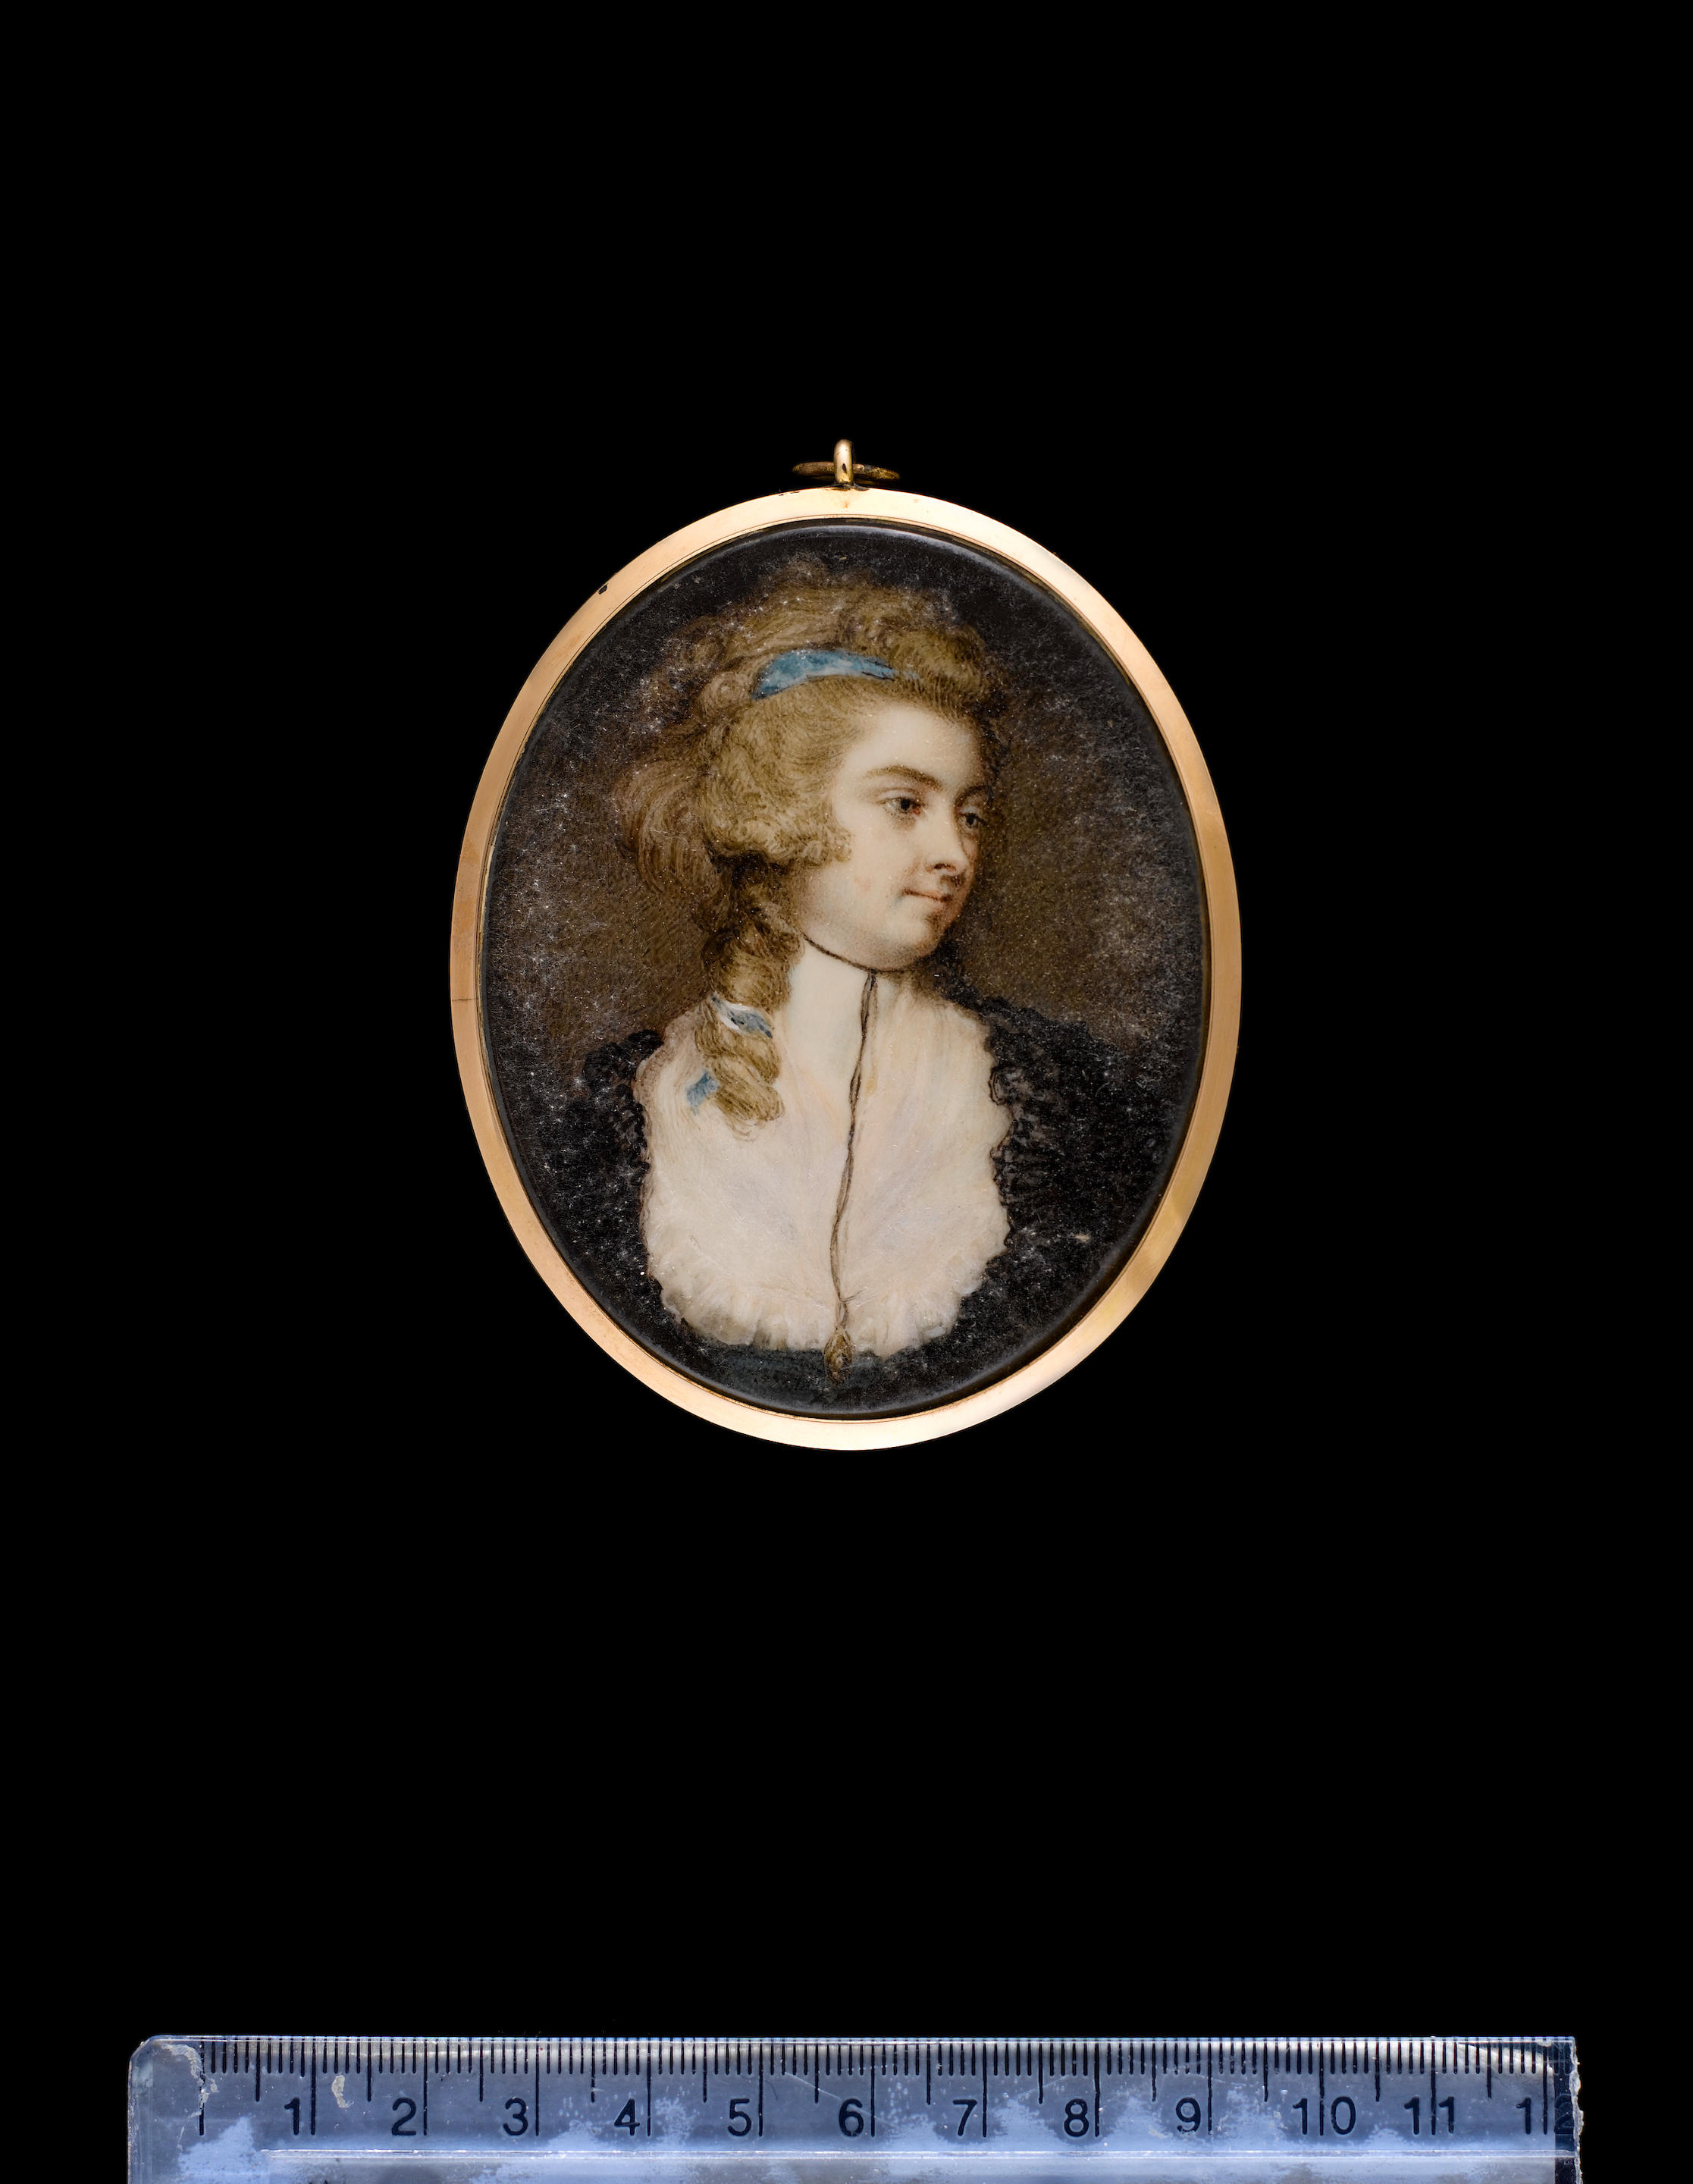 A Lady, Called Mrs Graves, Gazing To Her Left, Wearing Blue Dress With  Frilled White Fichu